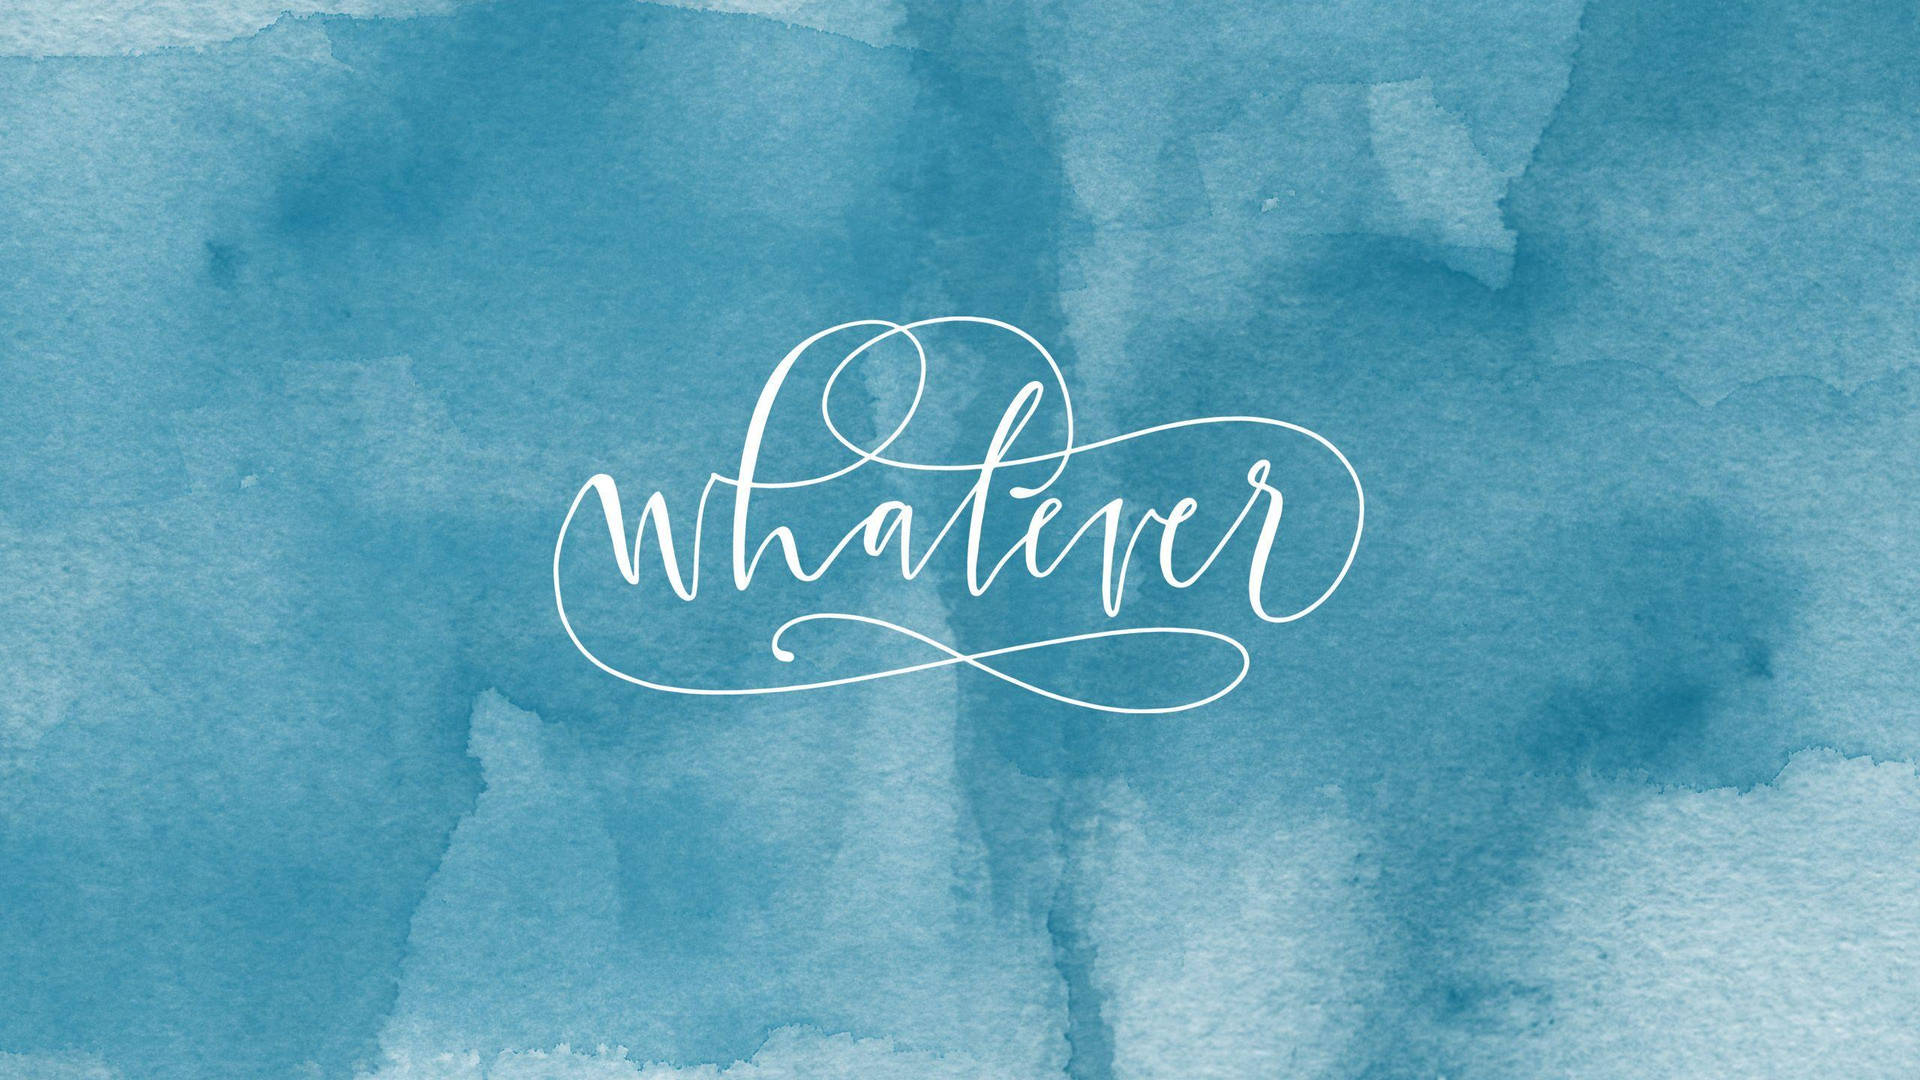 Teal Watercolor Blue Aesthetic Pc Background